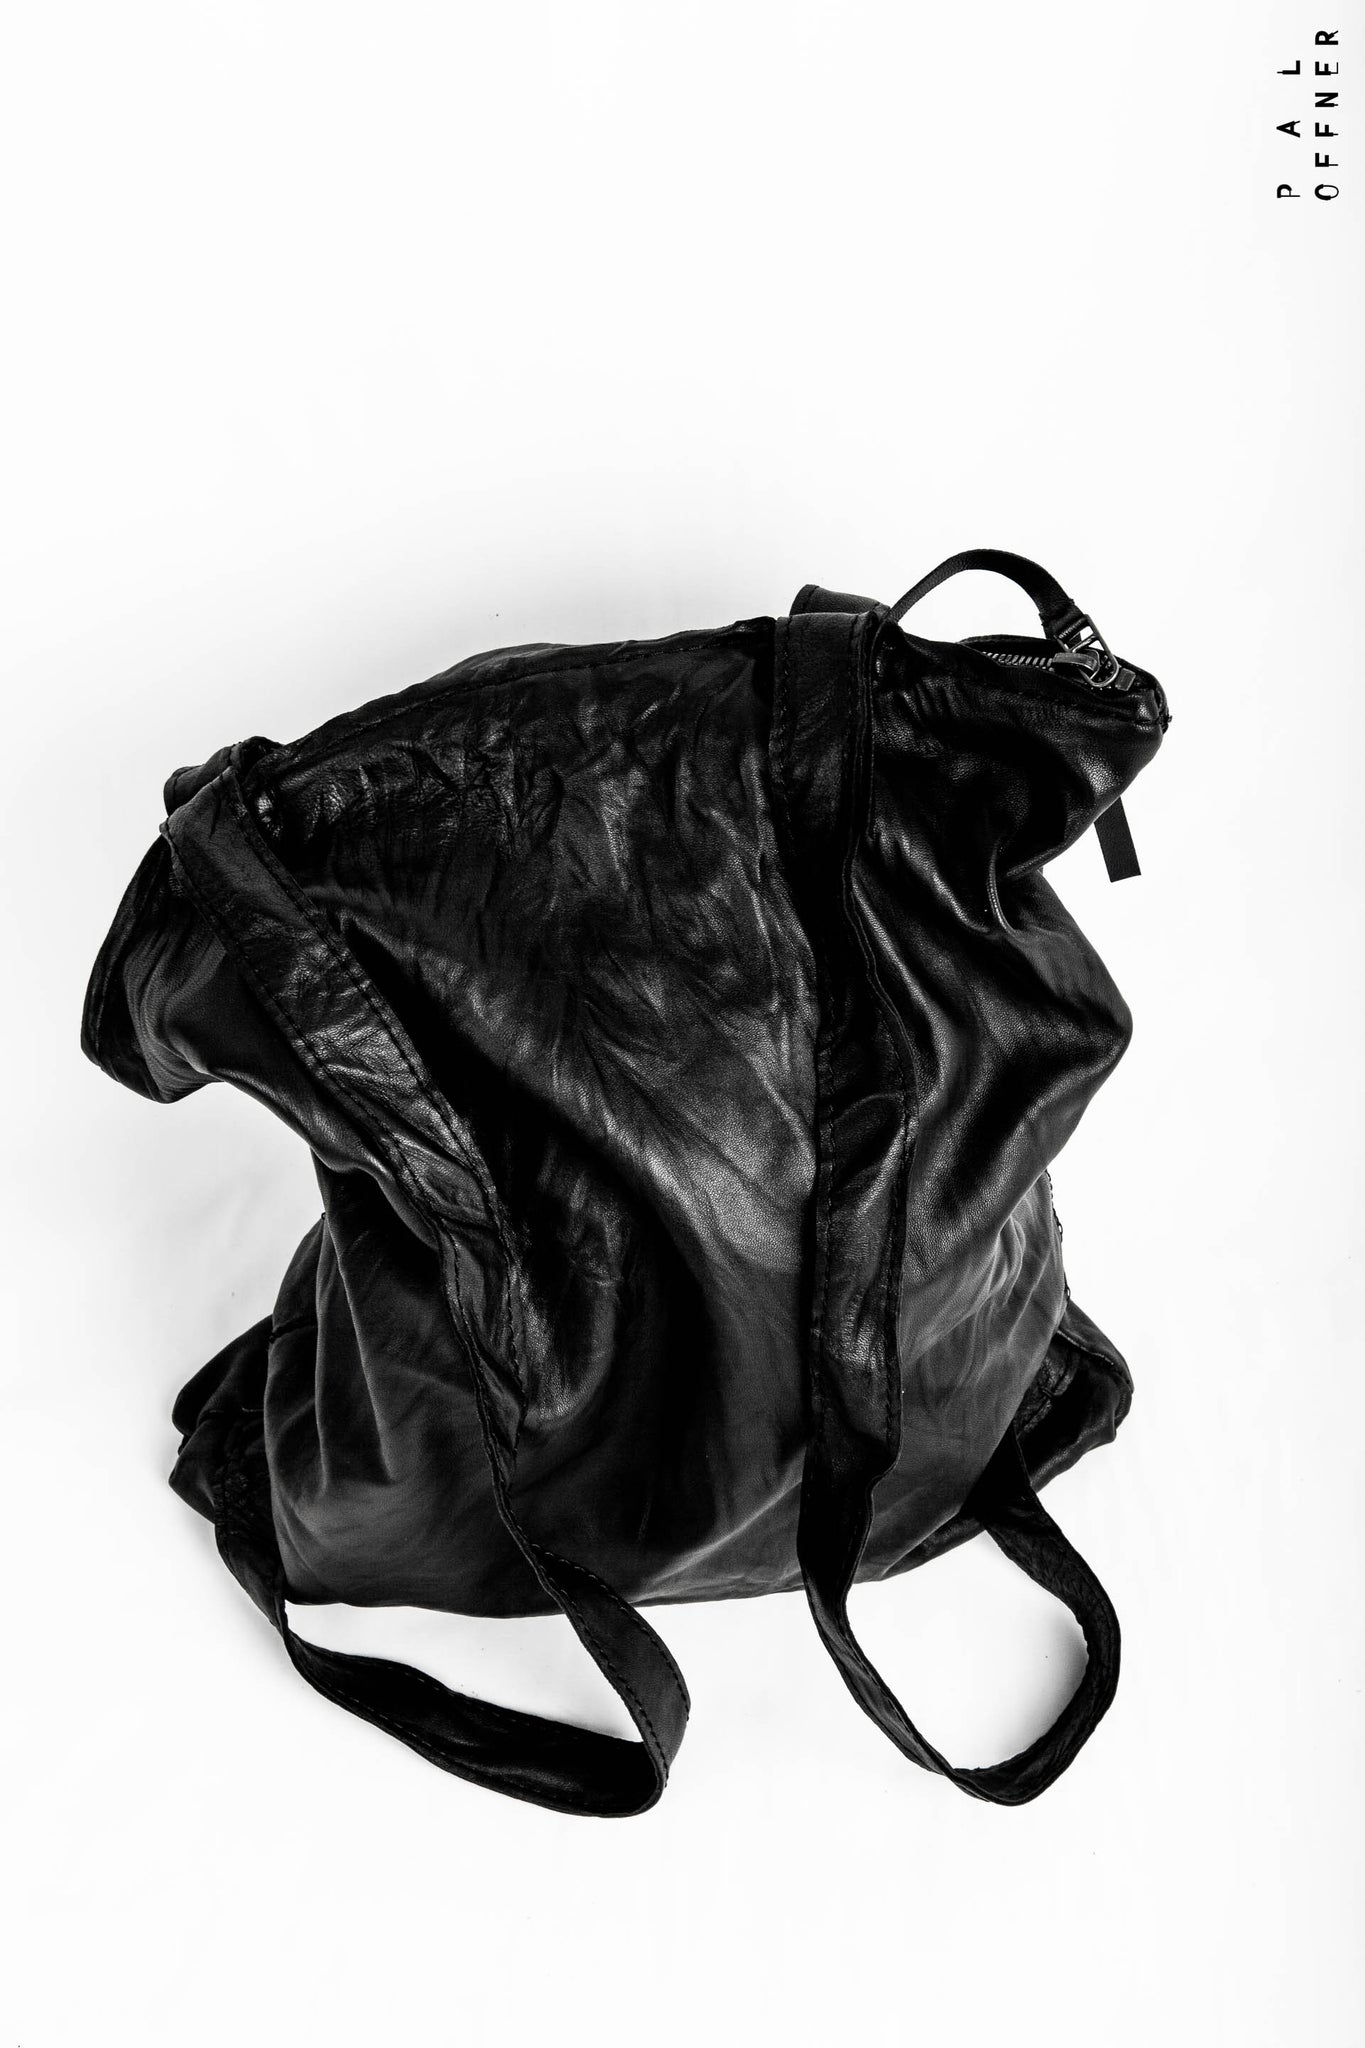 Tote Backpack_Leather